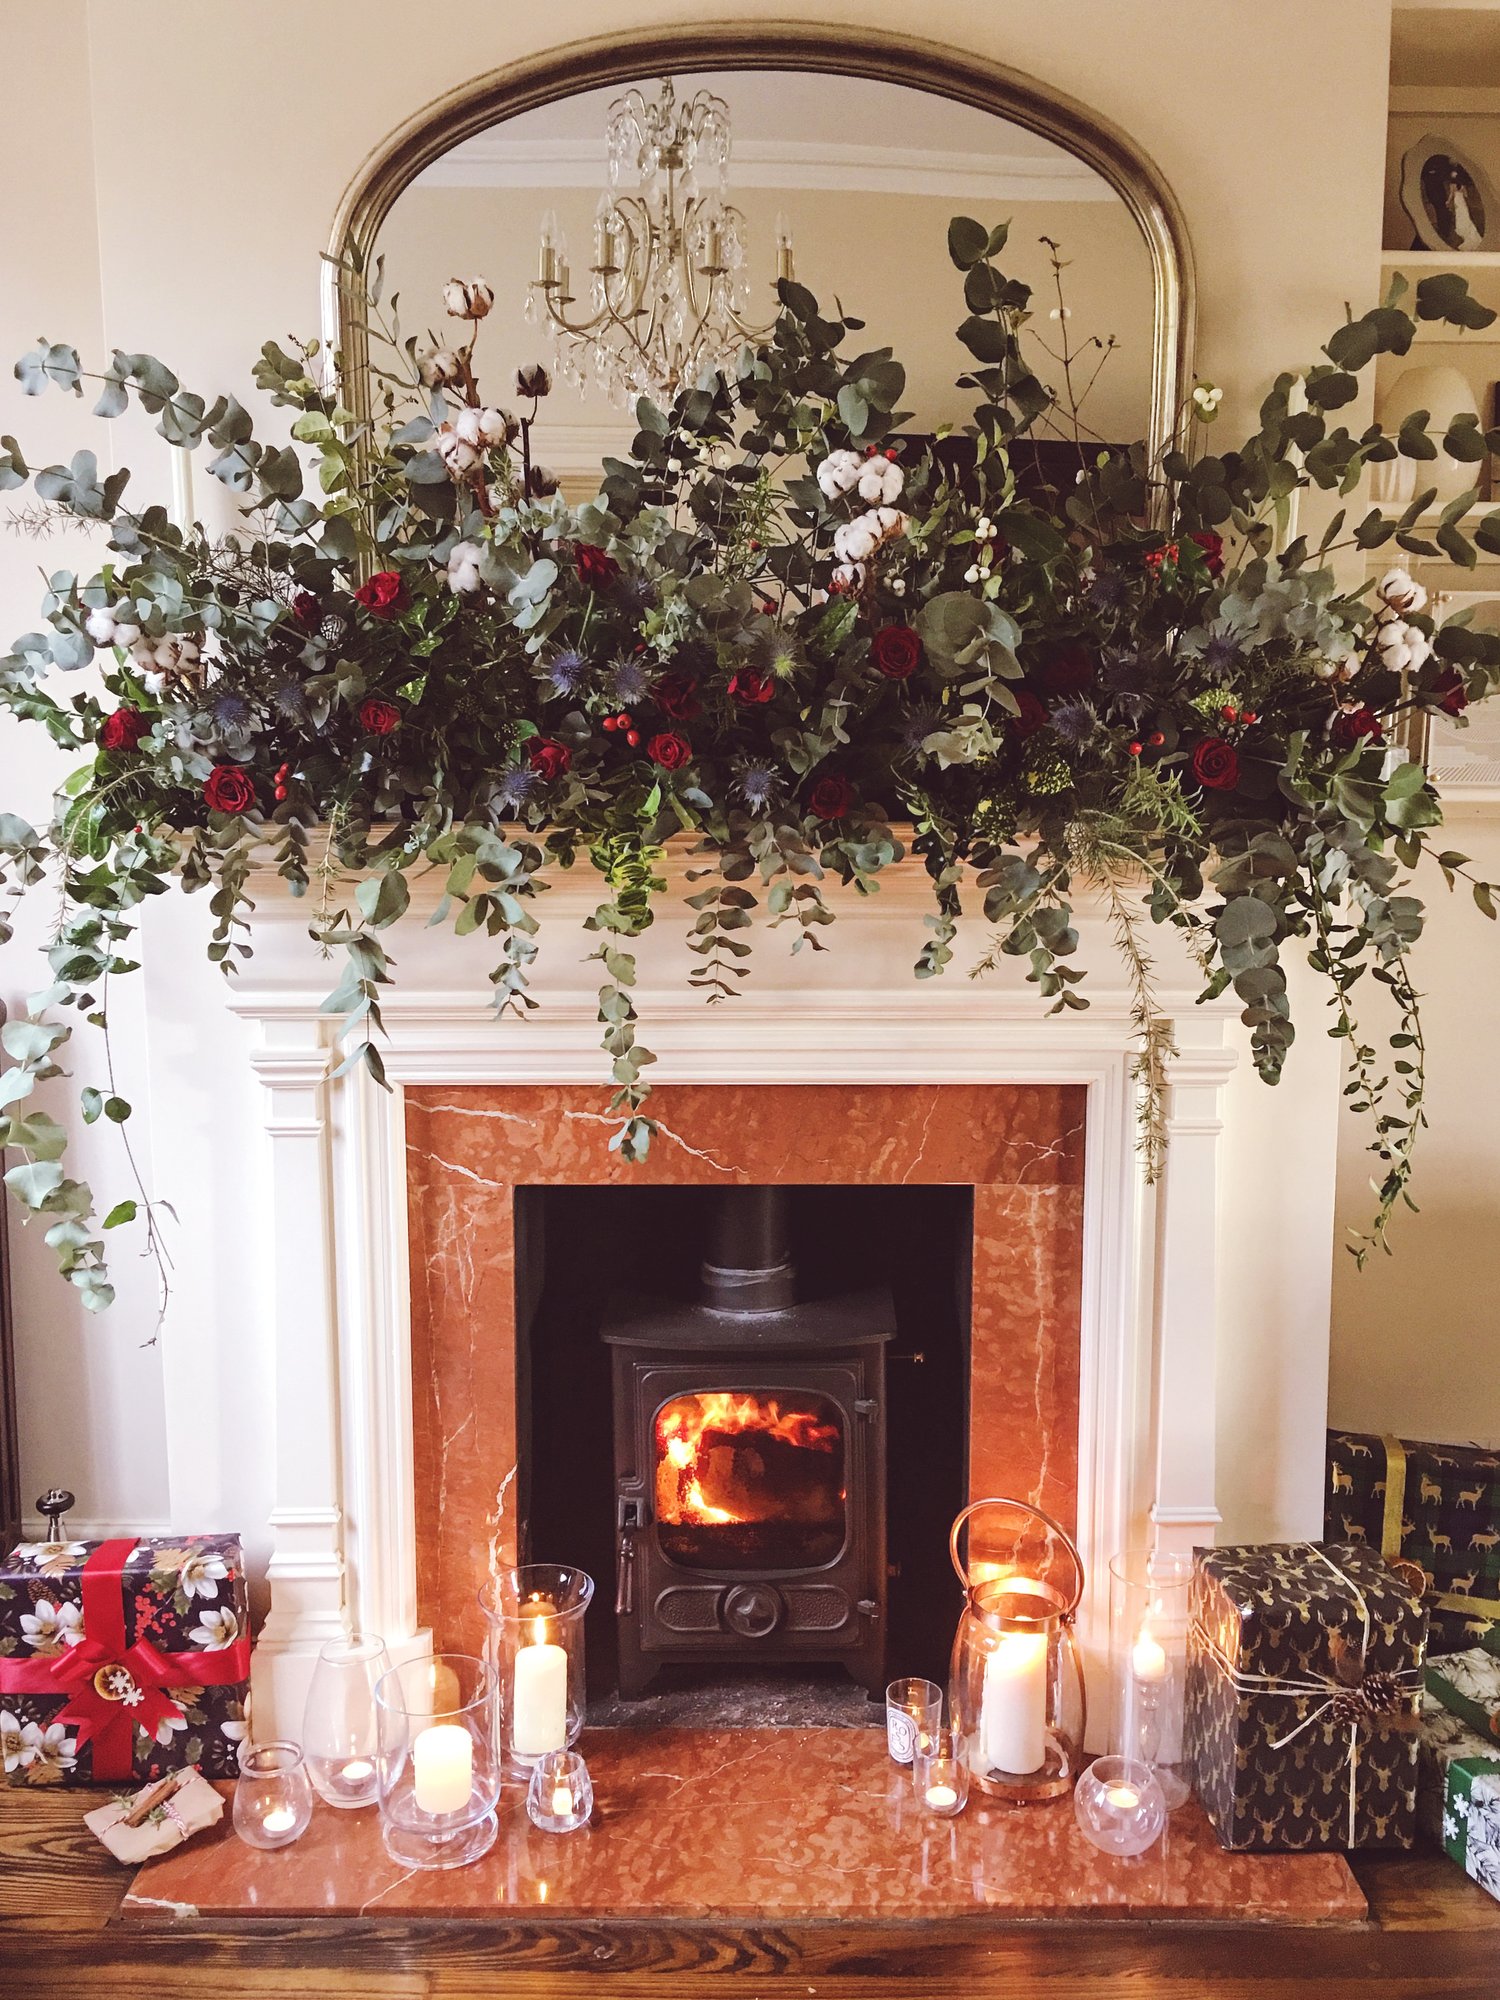 Big Lots Big Fireplaces Best Of My Home at Christmas How to Make This Fireplace Garland